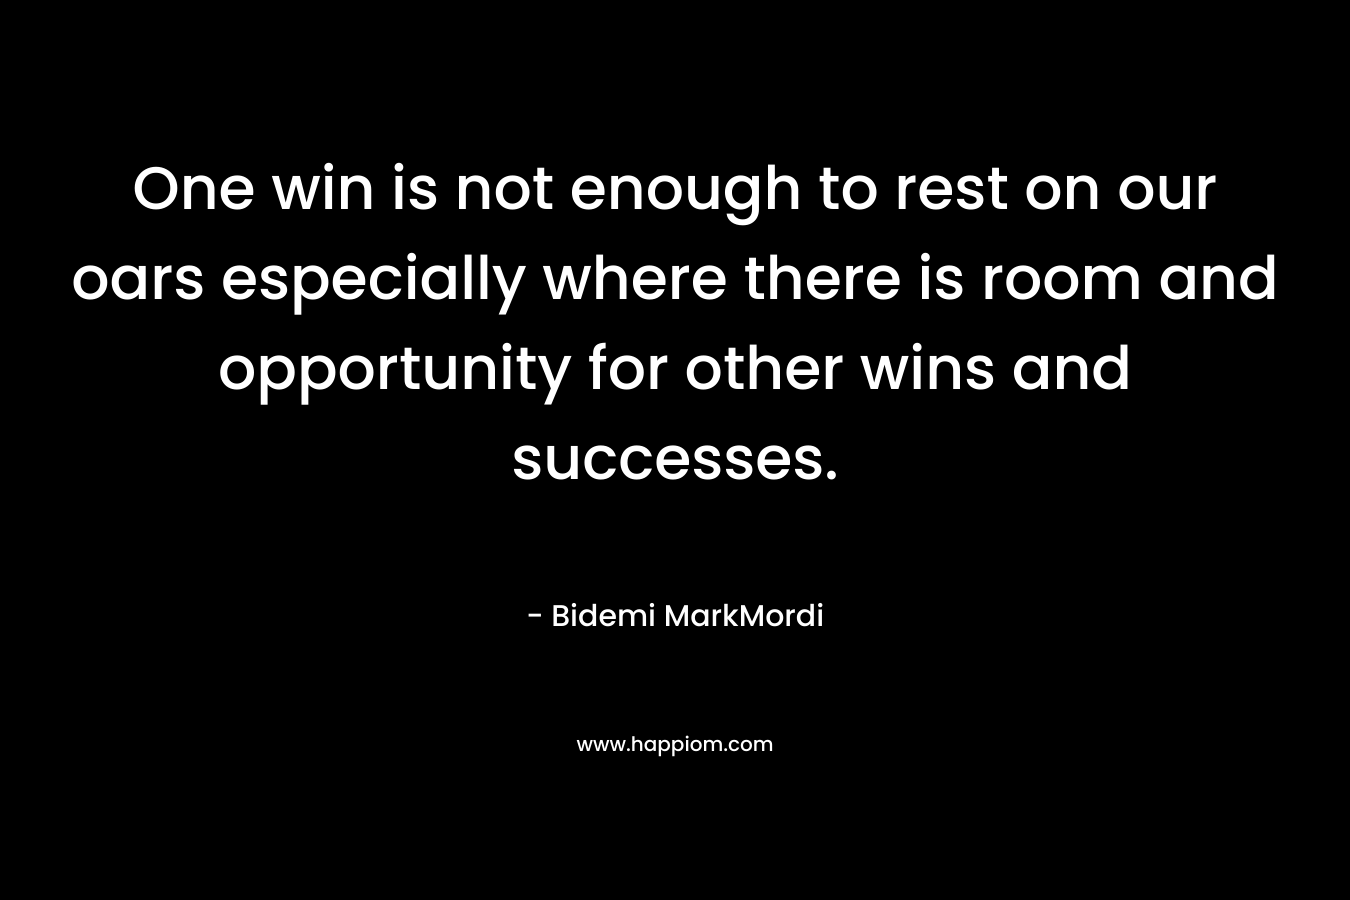 One win is not enough to rest on our oars especially where there is room and opportunity for other wins and successes. – Bidemi MarkMordi